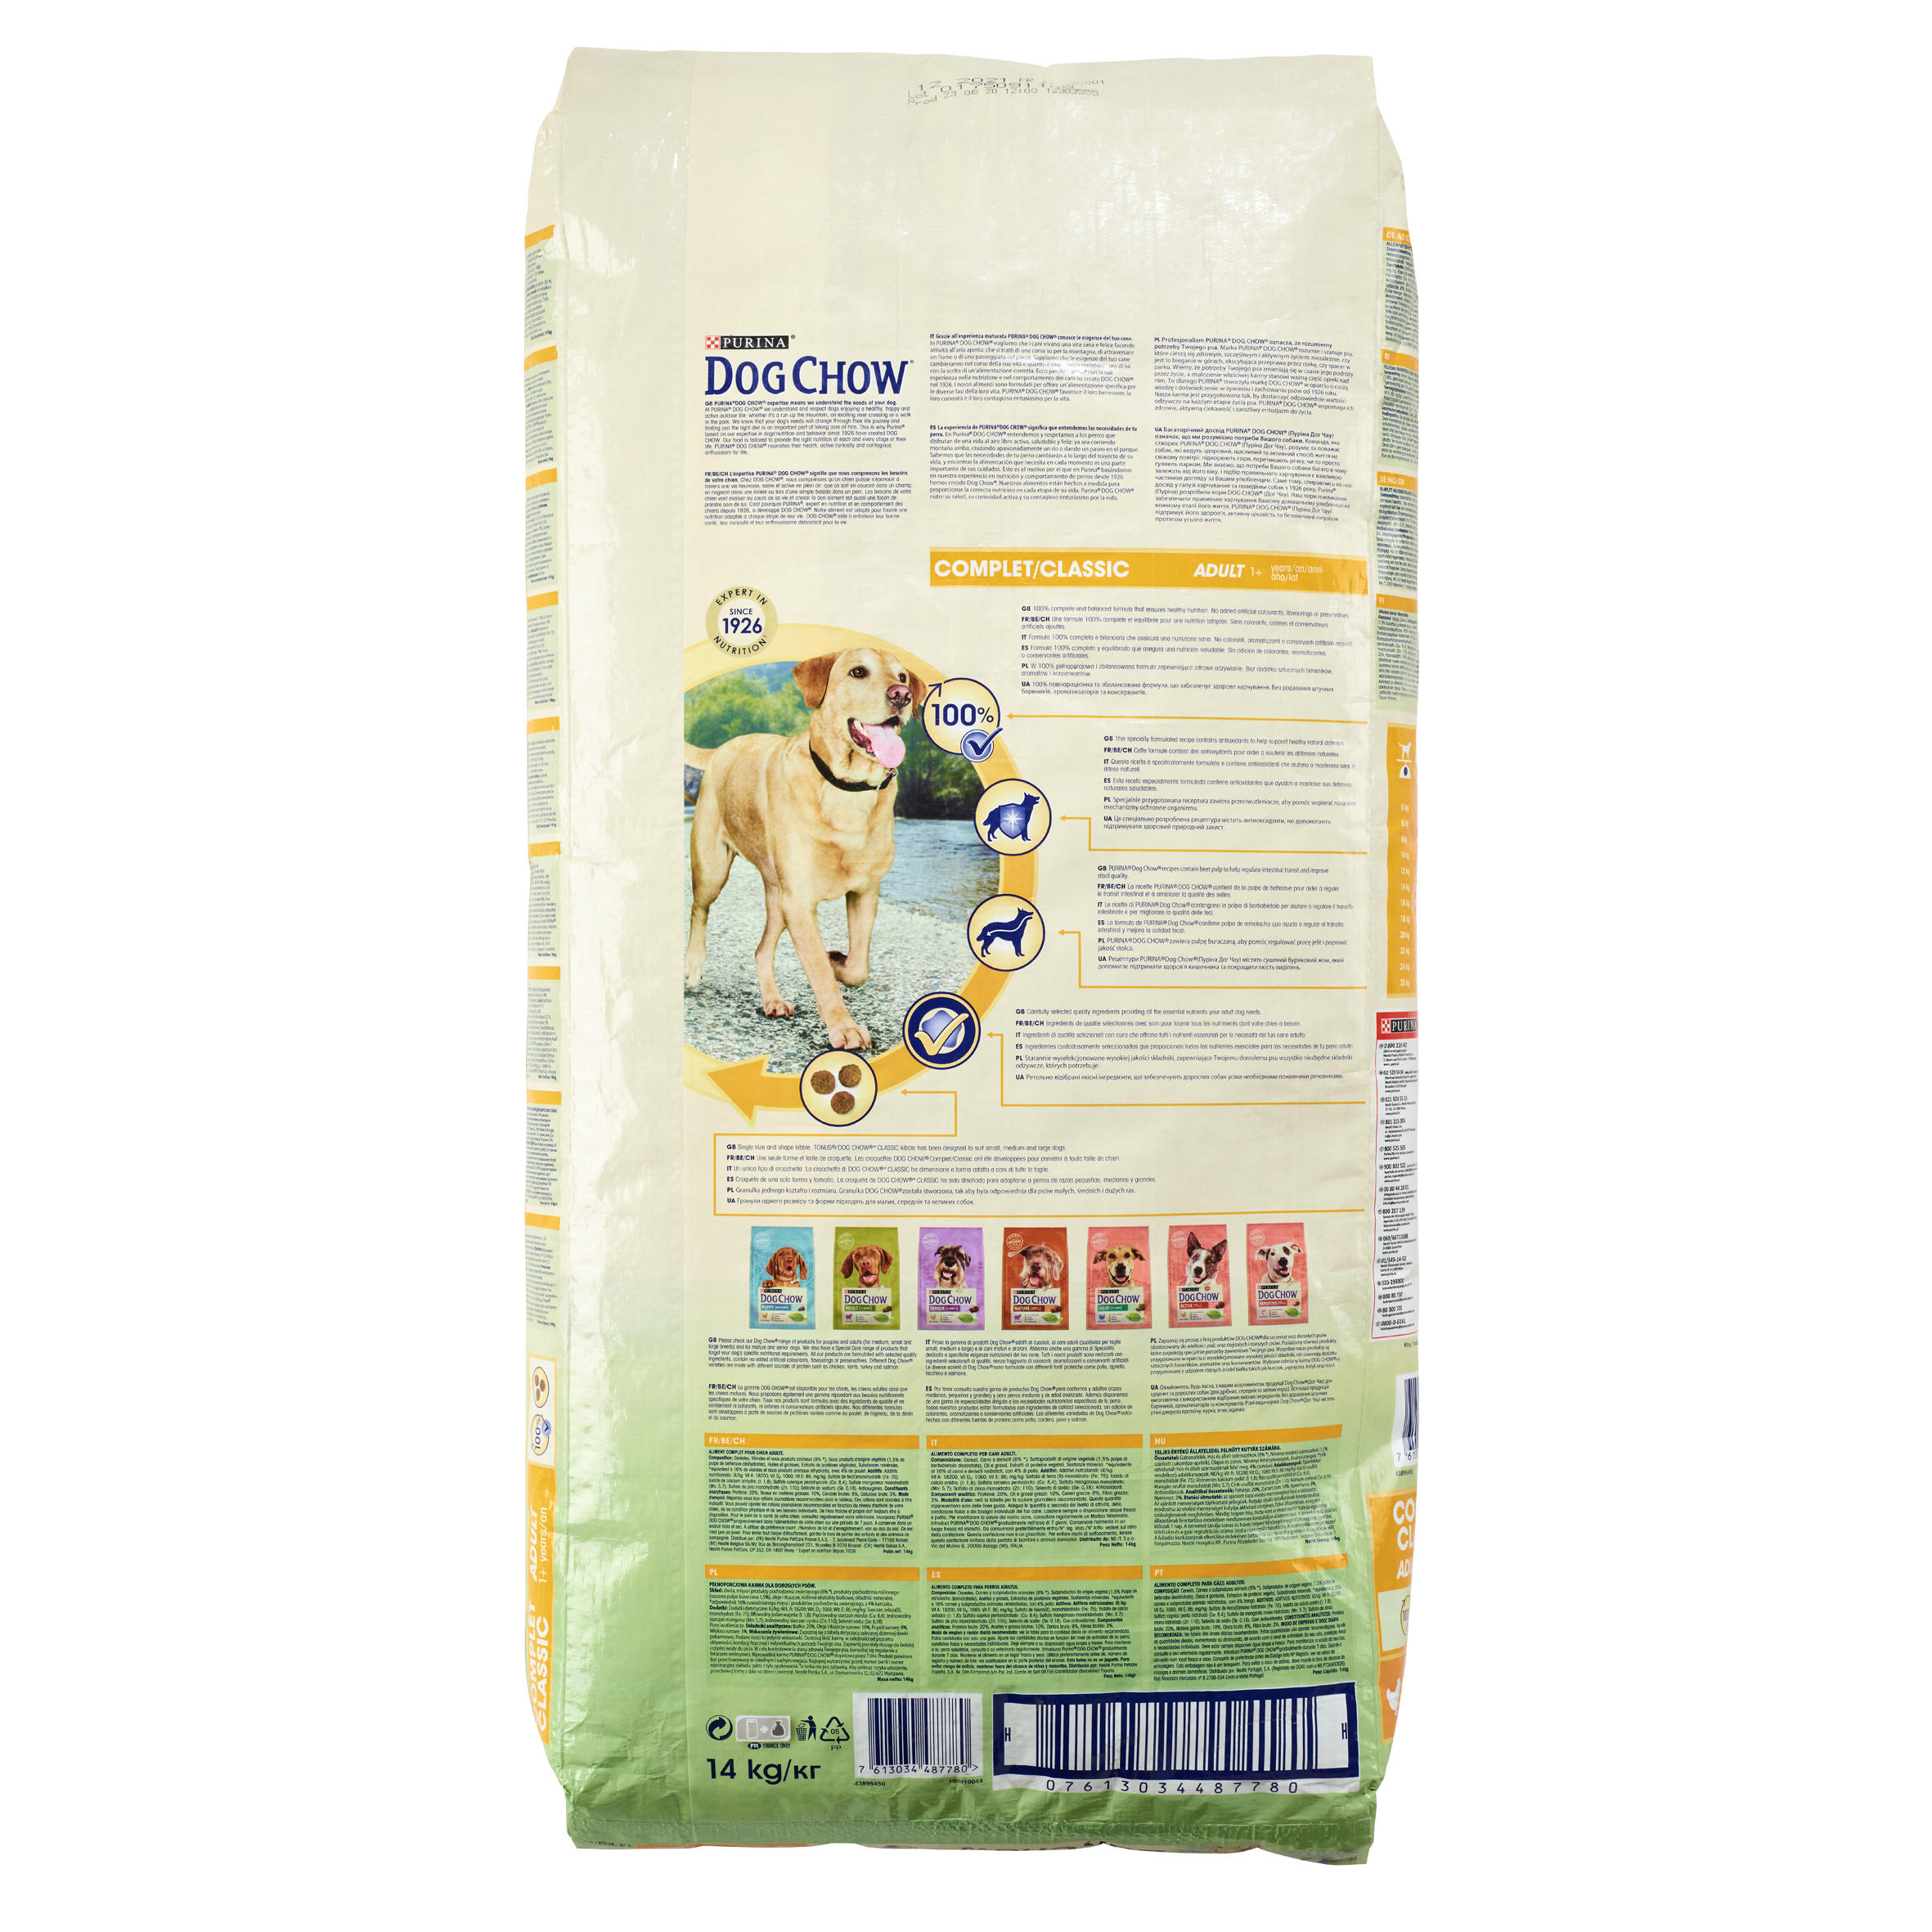 DRY FOOD ADULT DOG  COMPLETE/CLASSIC CHICKEN DOGCHOW 14KG 2/4